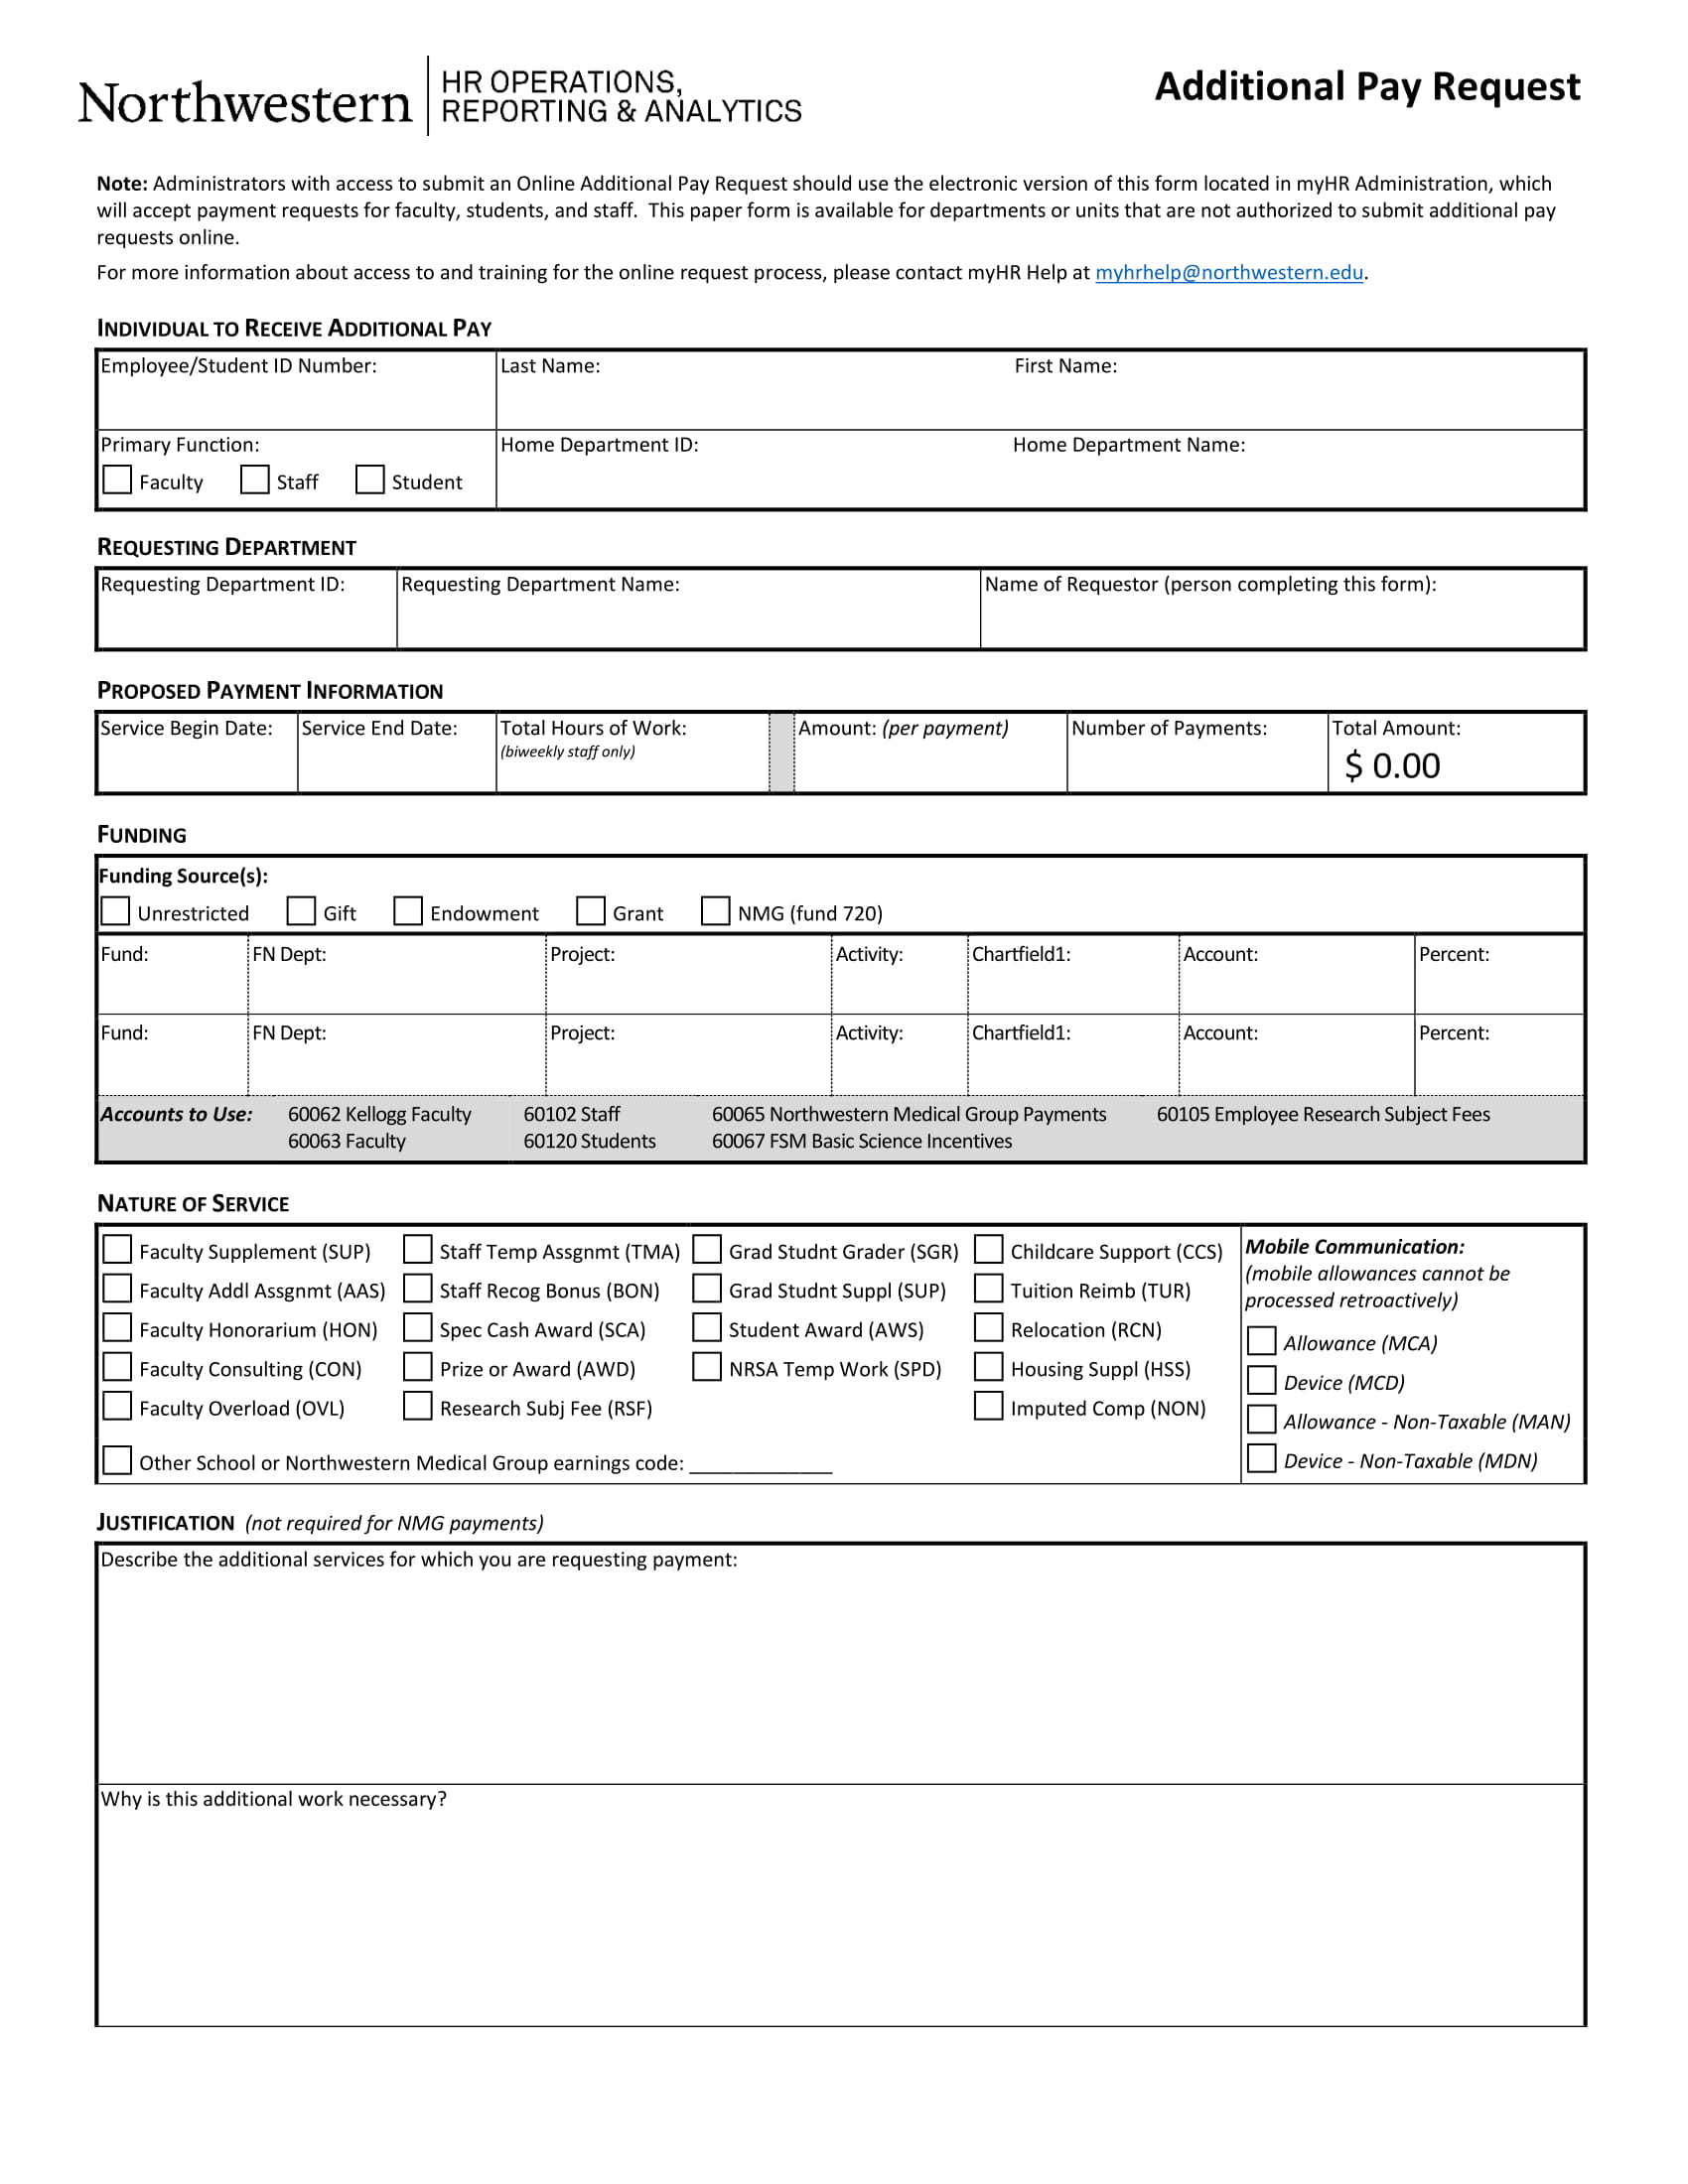 additional pay request form 1